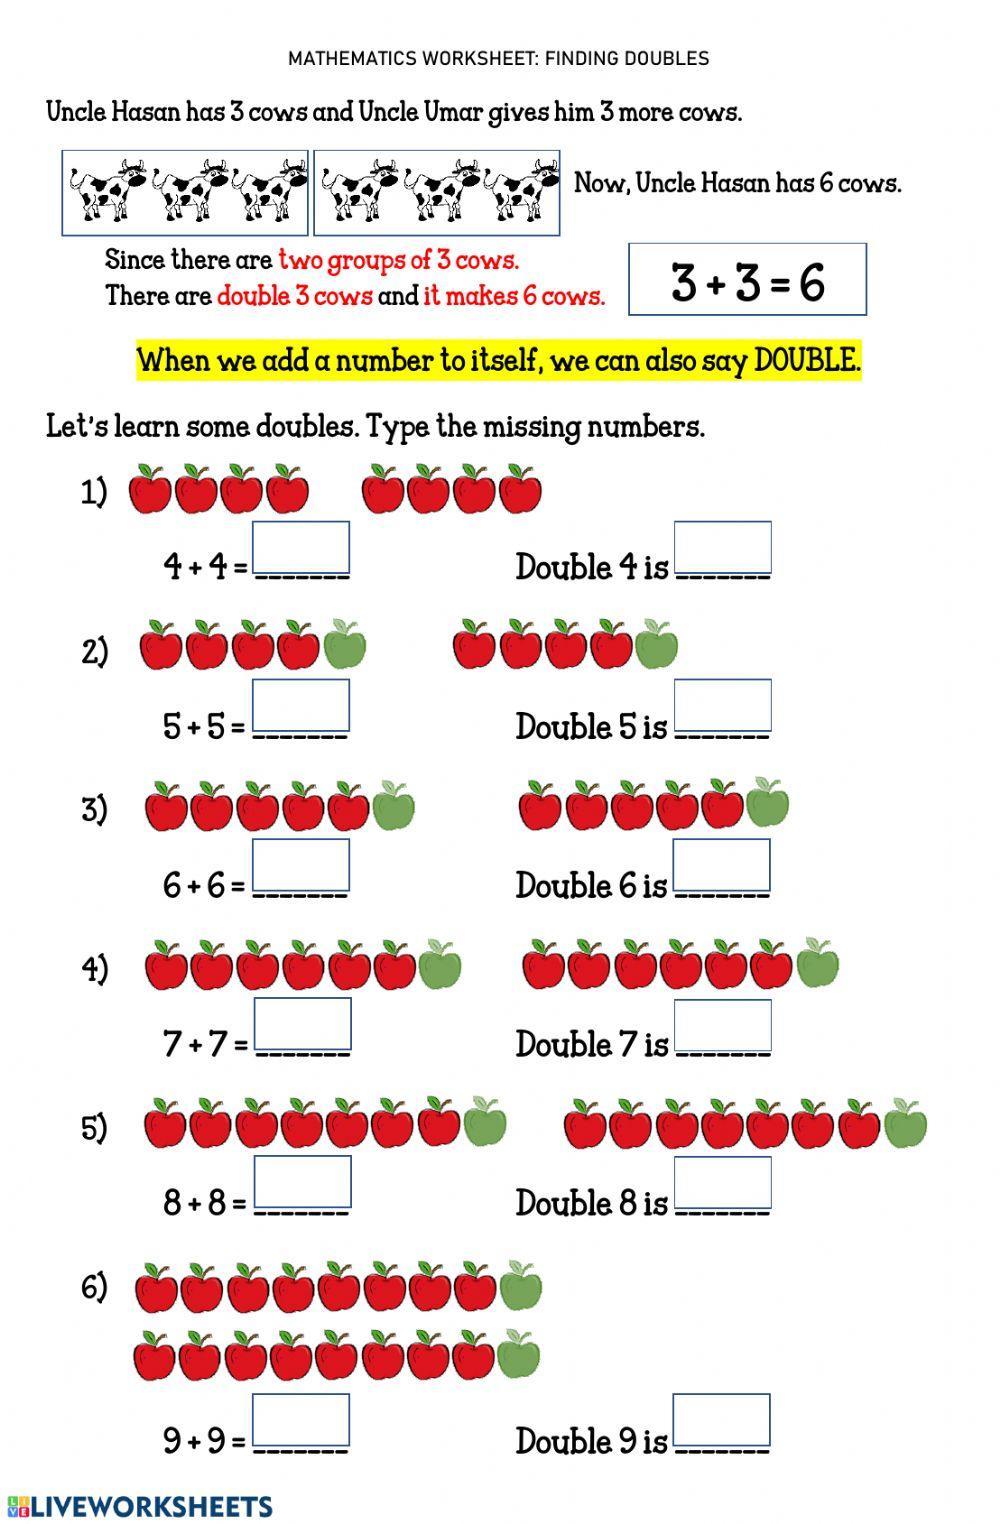 Worksheet 12 FINDING DOUBLES